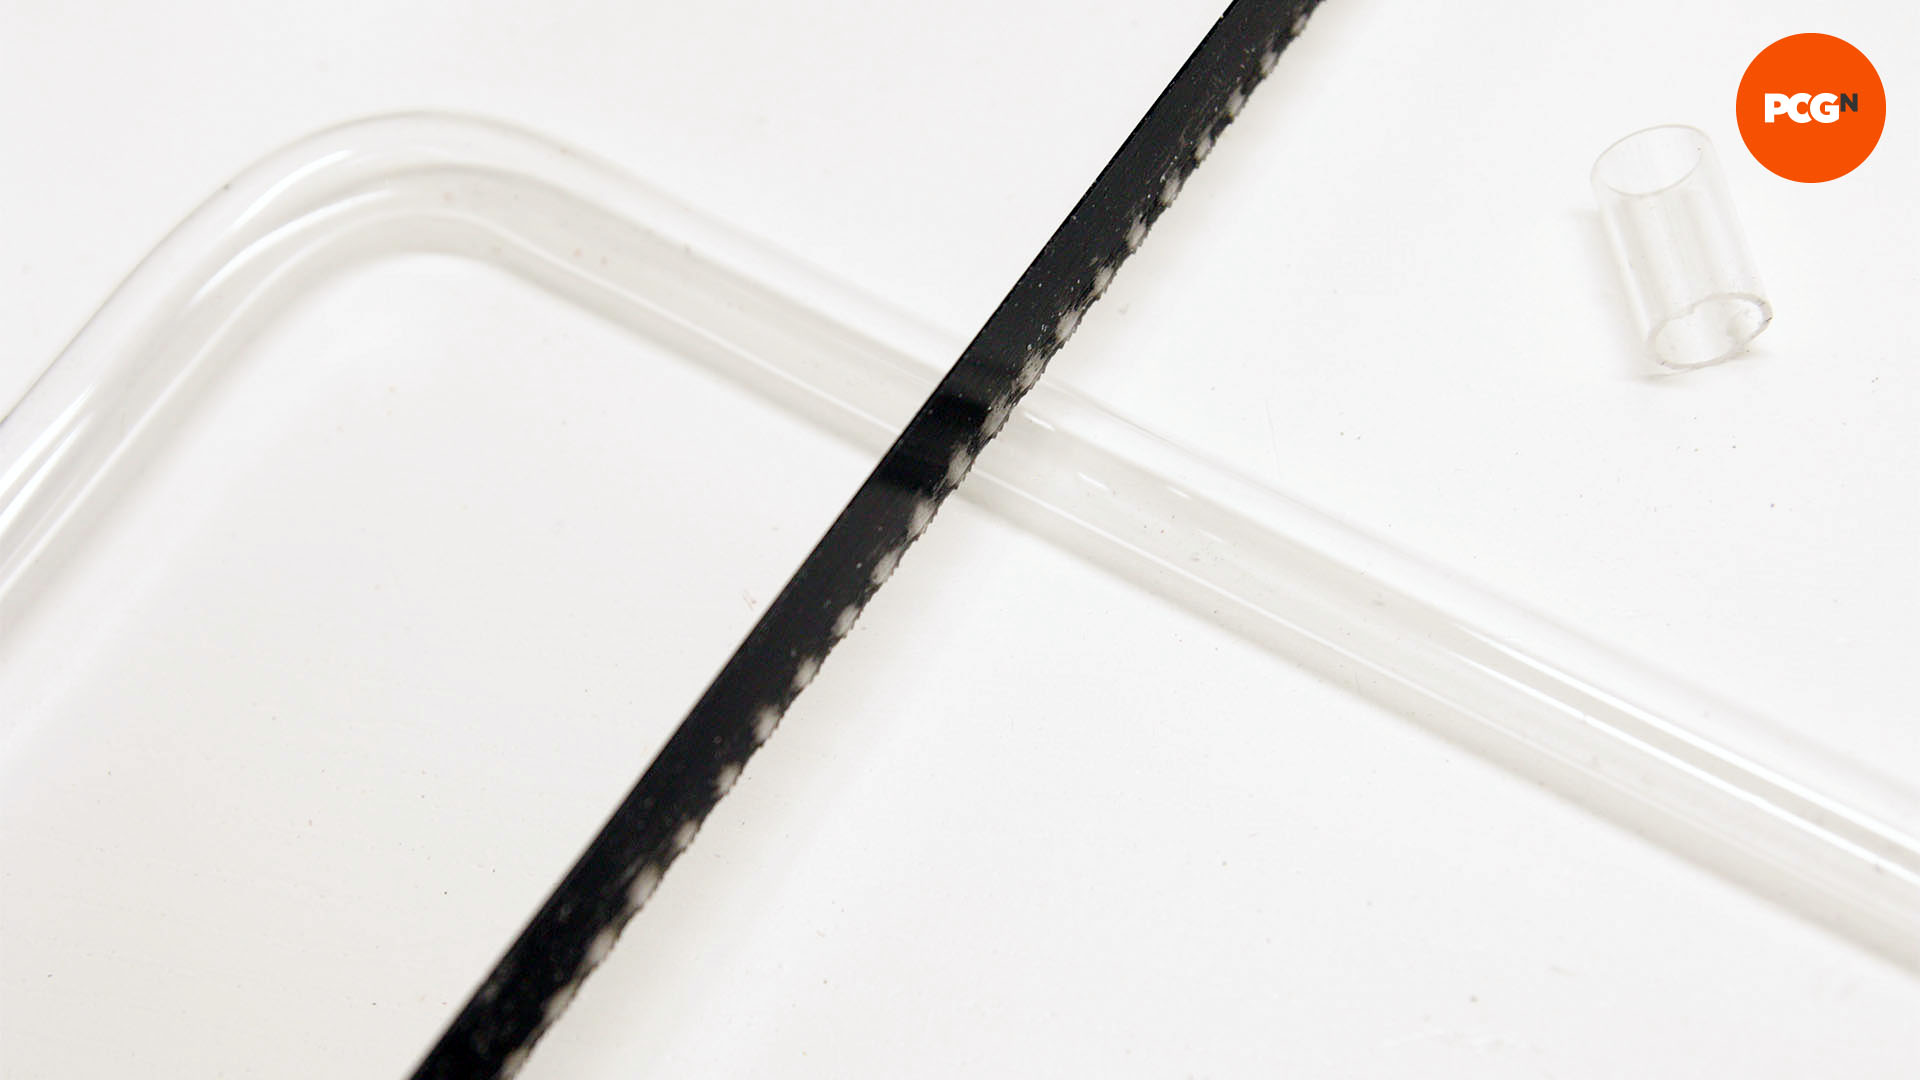 How to cut and bend hard water cooling tubing: Use a hacksaw